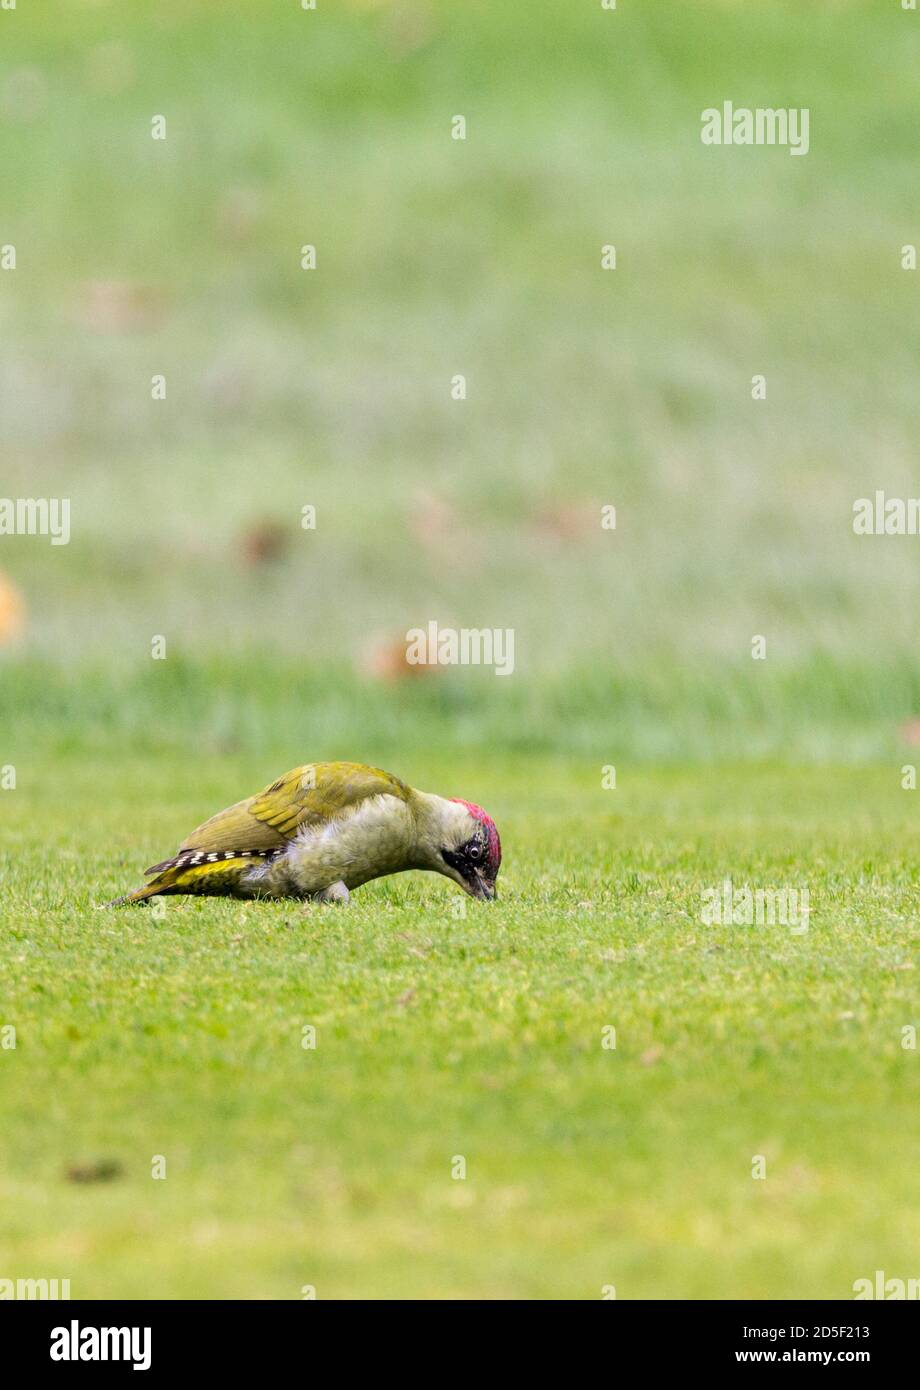 Green woodpecker Picus viridis, female hunting for prey on golf course. Red patch on nape black facial markings green back and greenish buff underside Stock Photo